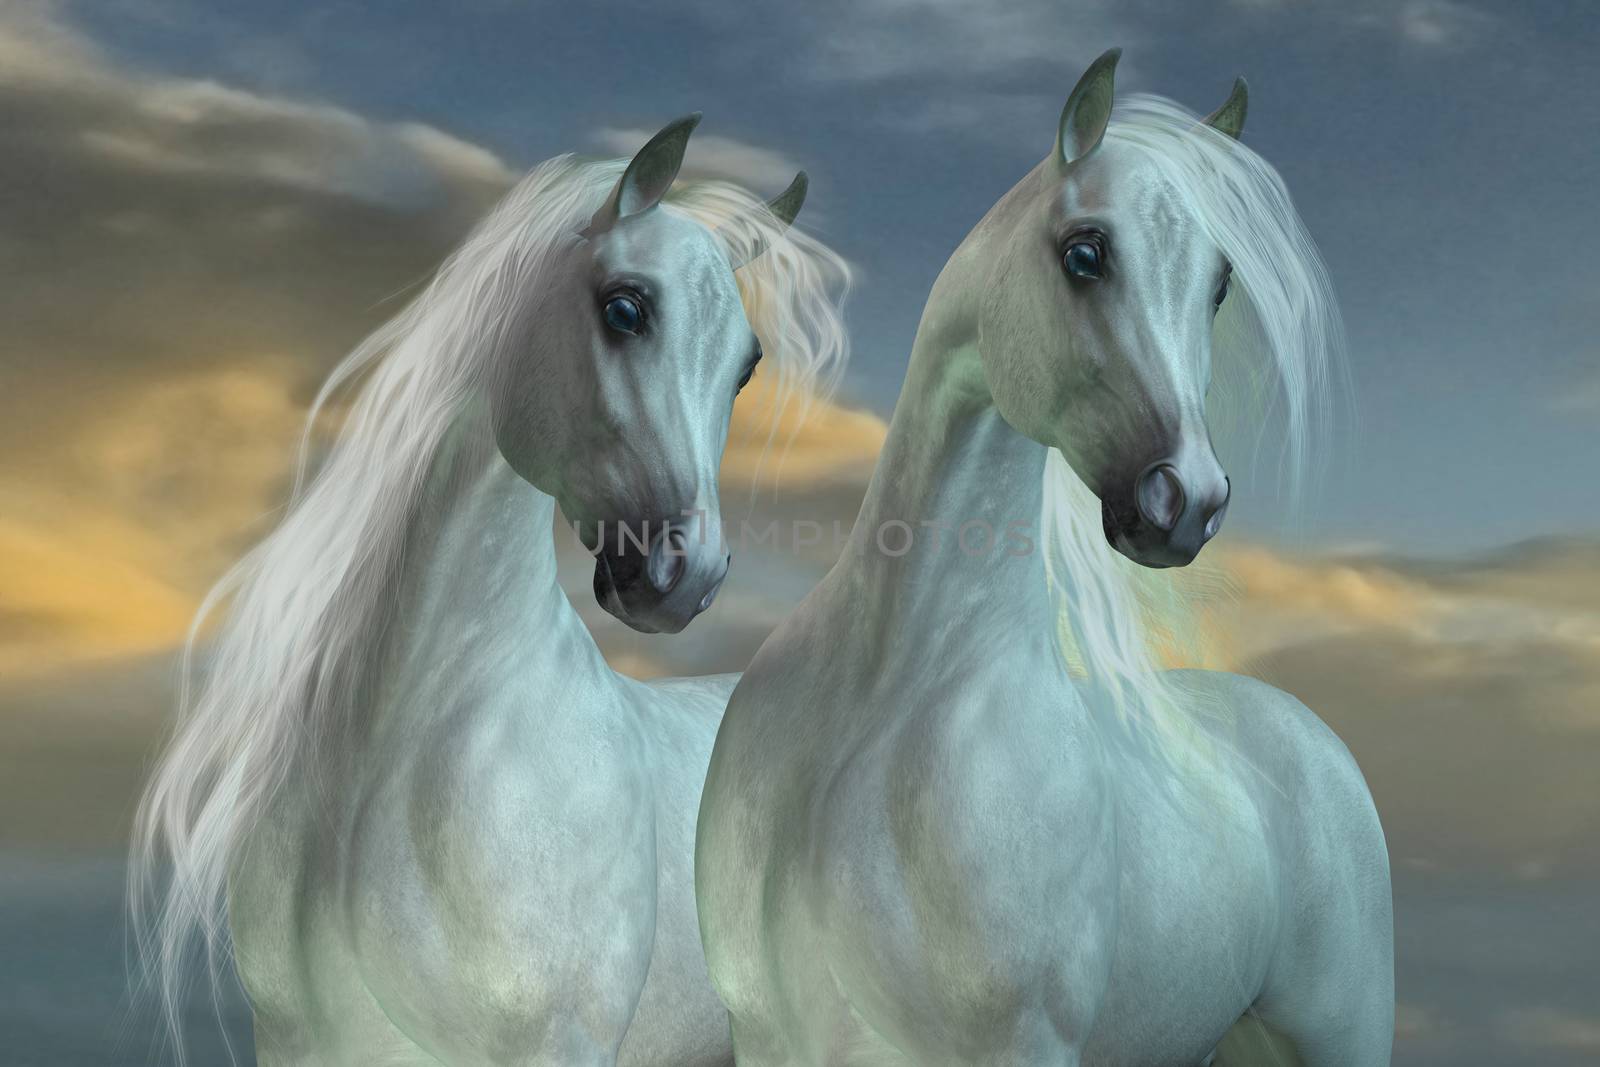 The Arabian horse breed was developed in the deserts of the Arabian Peninsula.